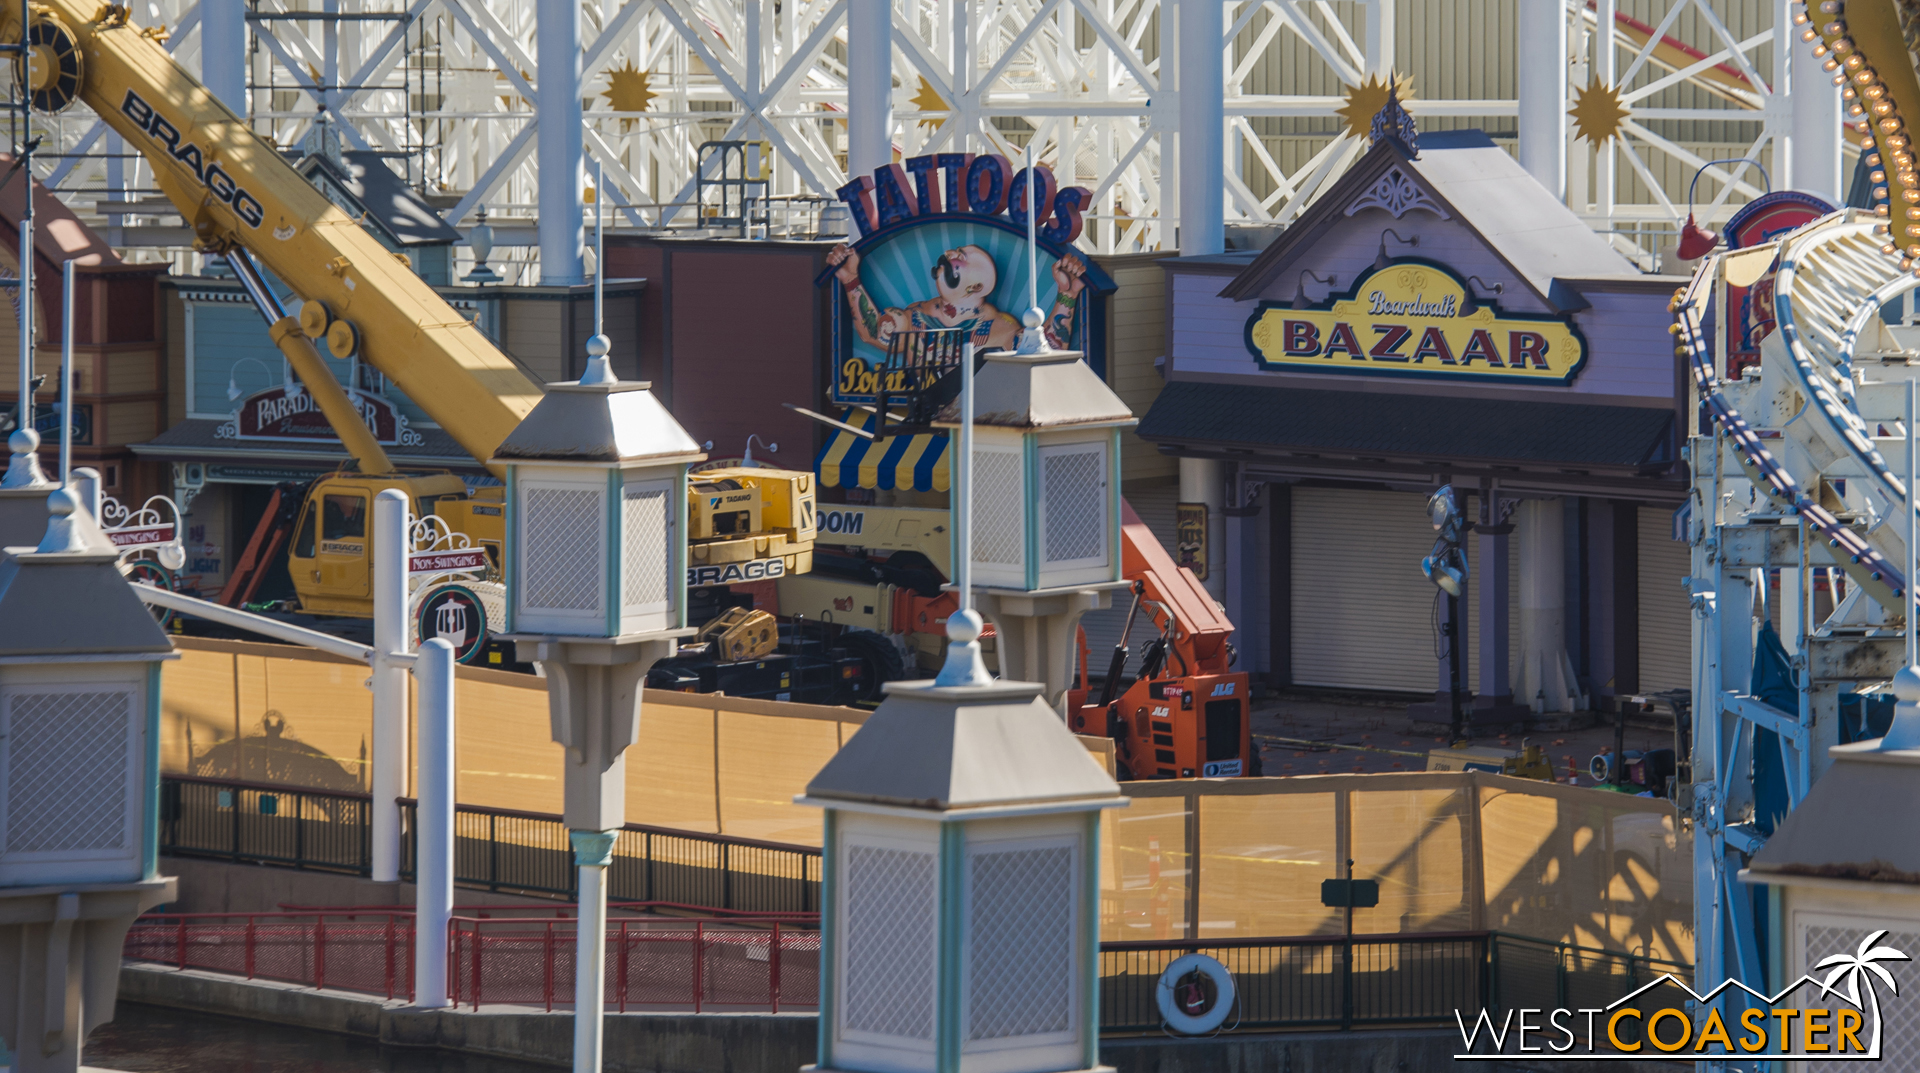  The wooden planks along the walkway have also been removed. 